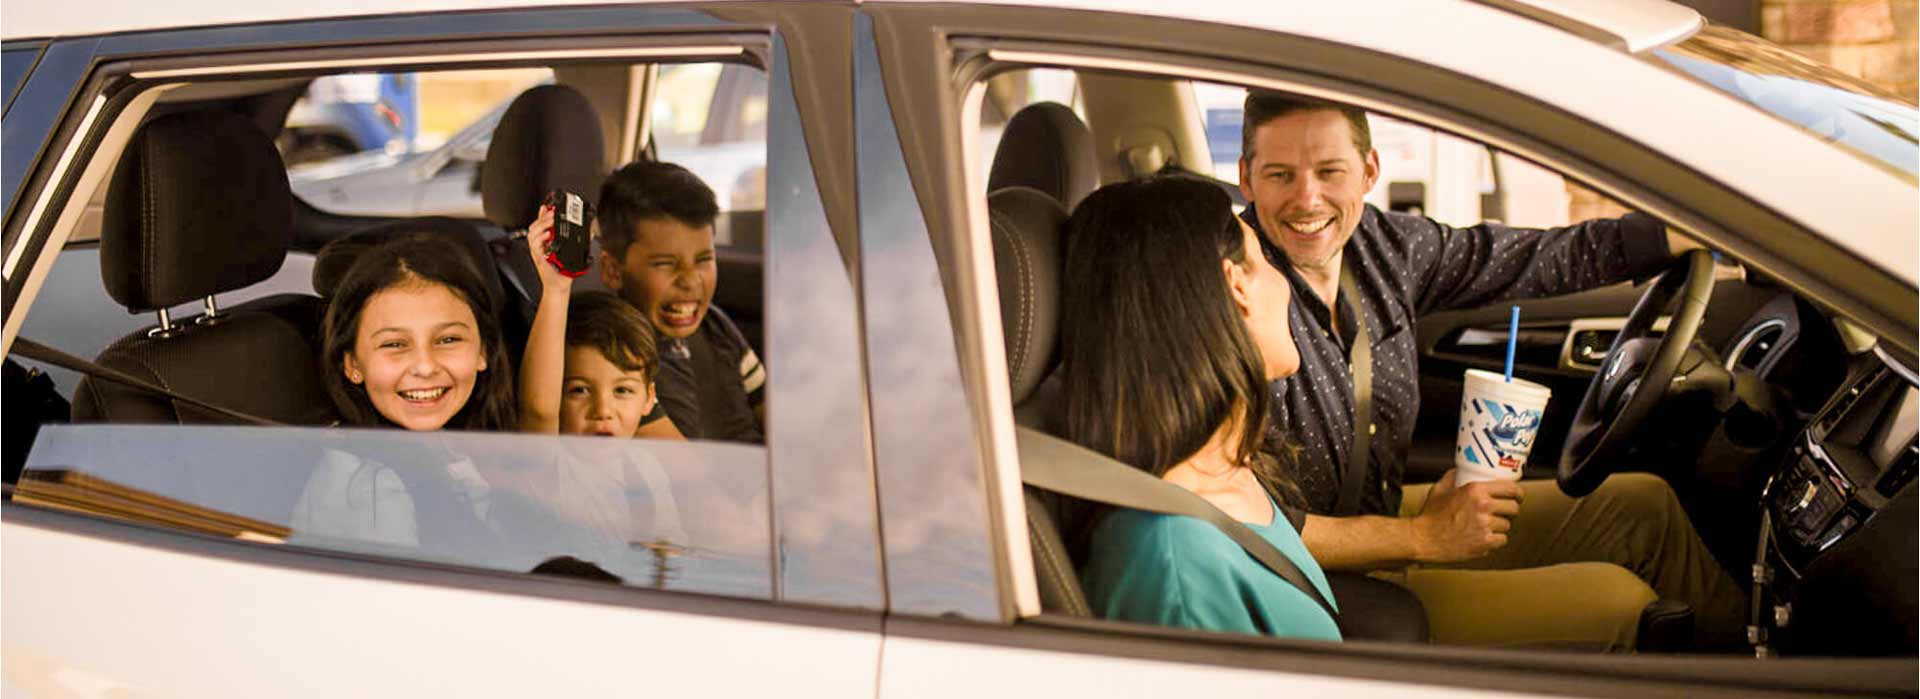 A family smiling and laughing inside their car.